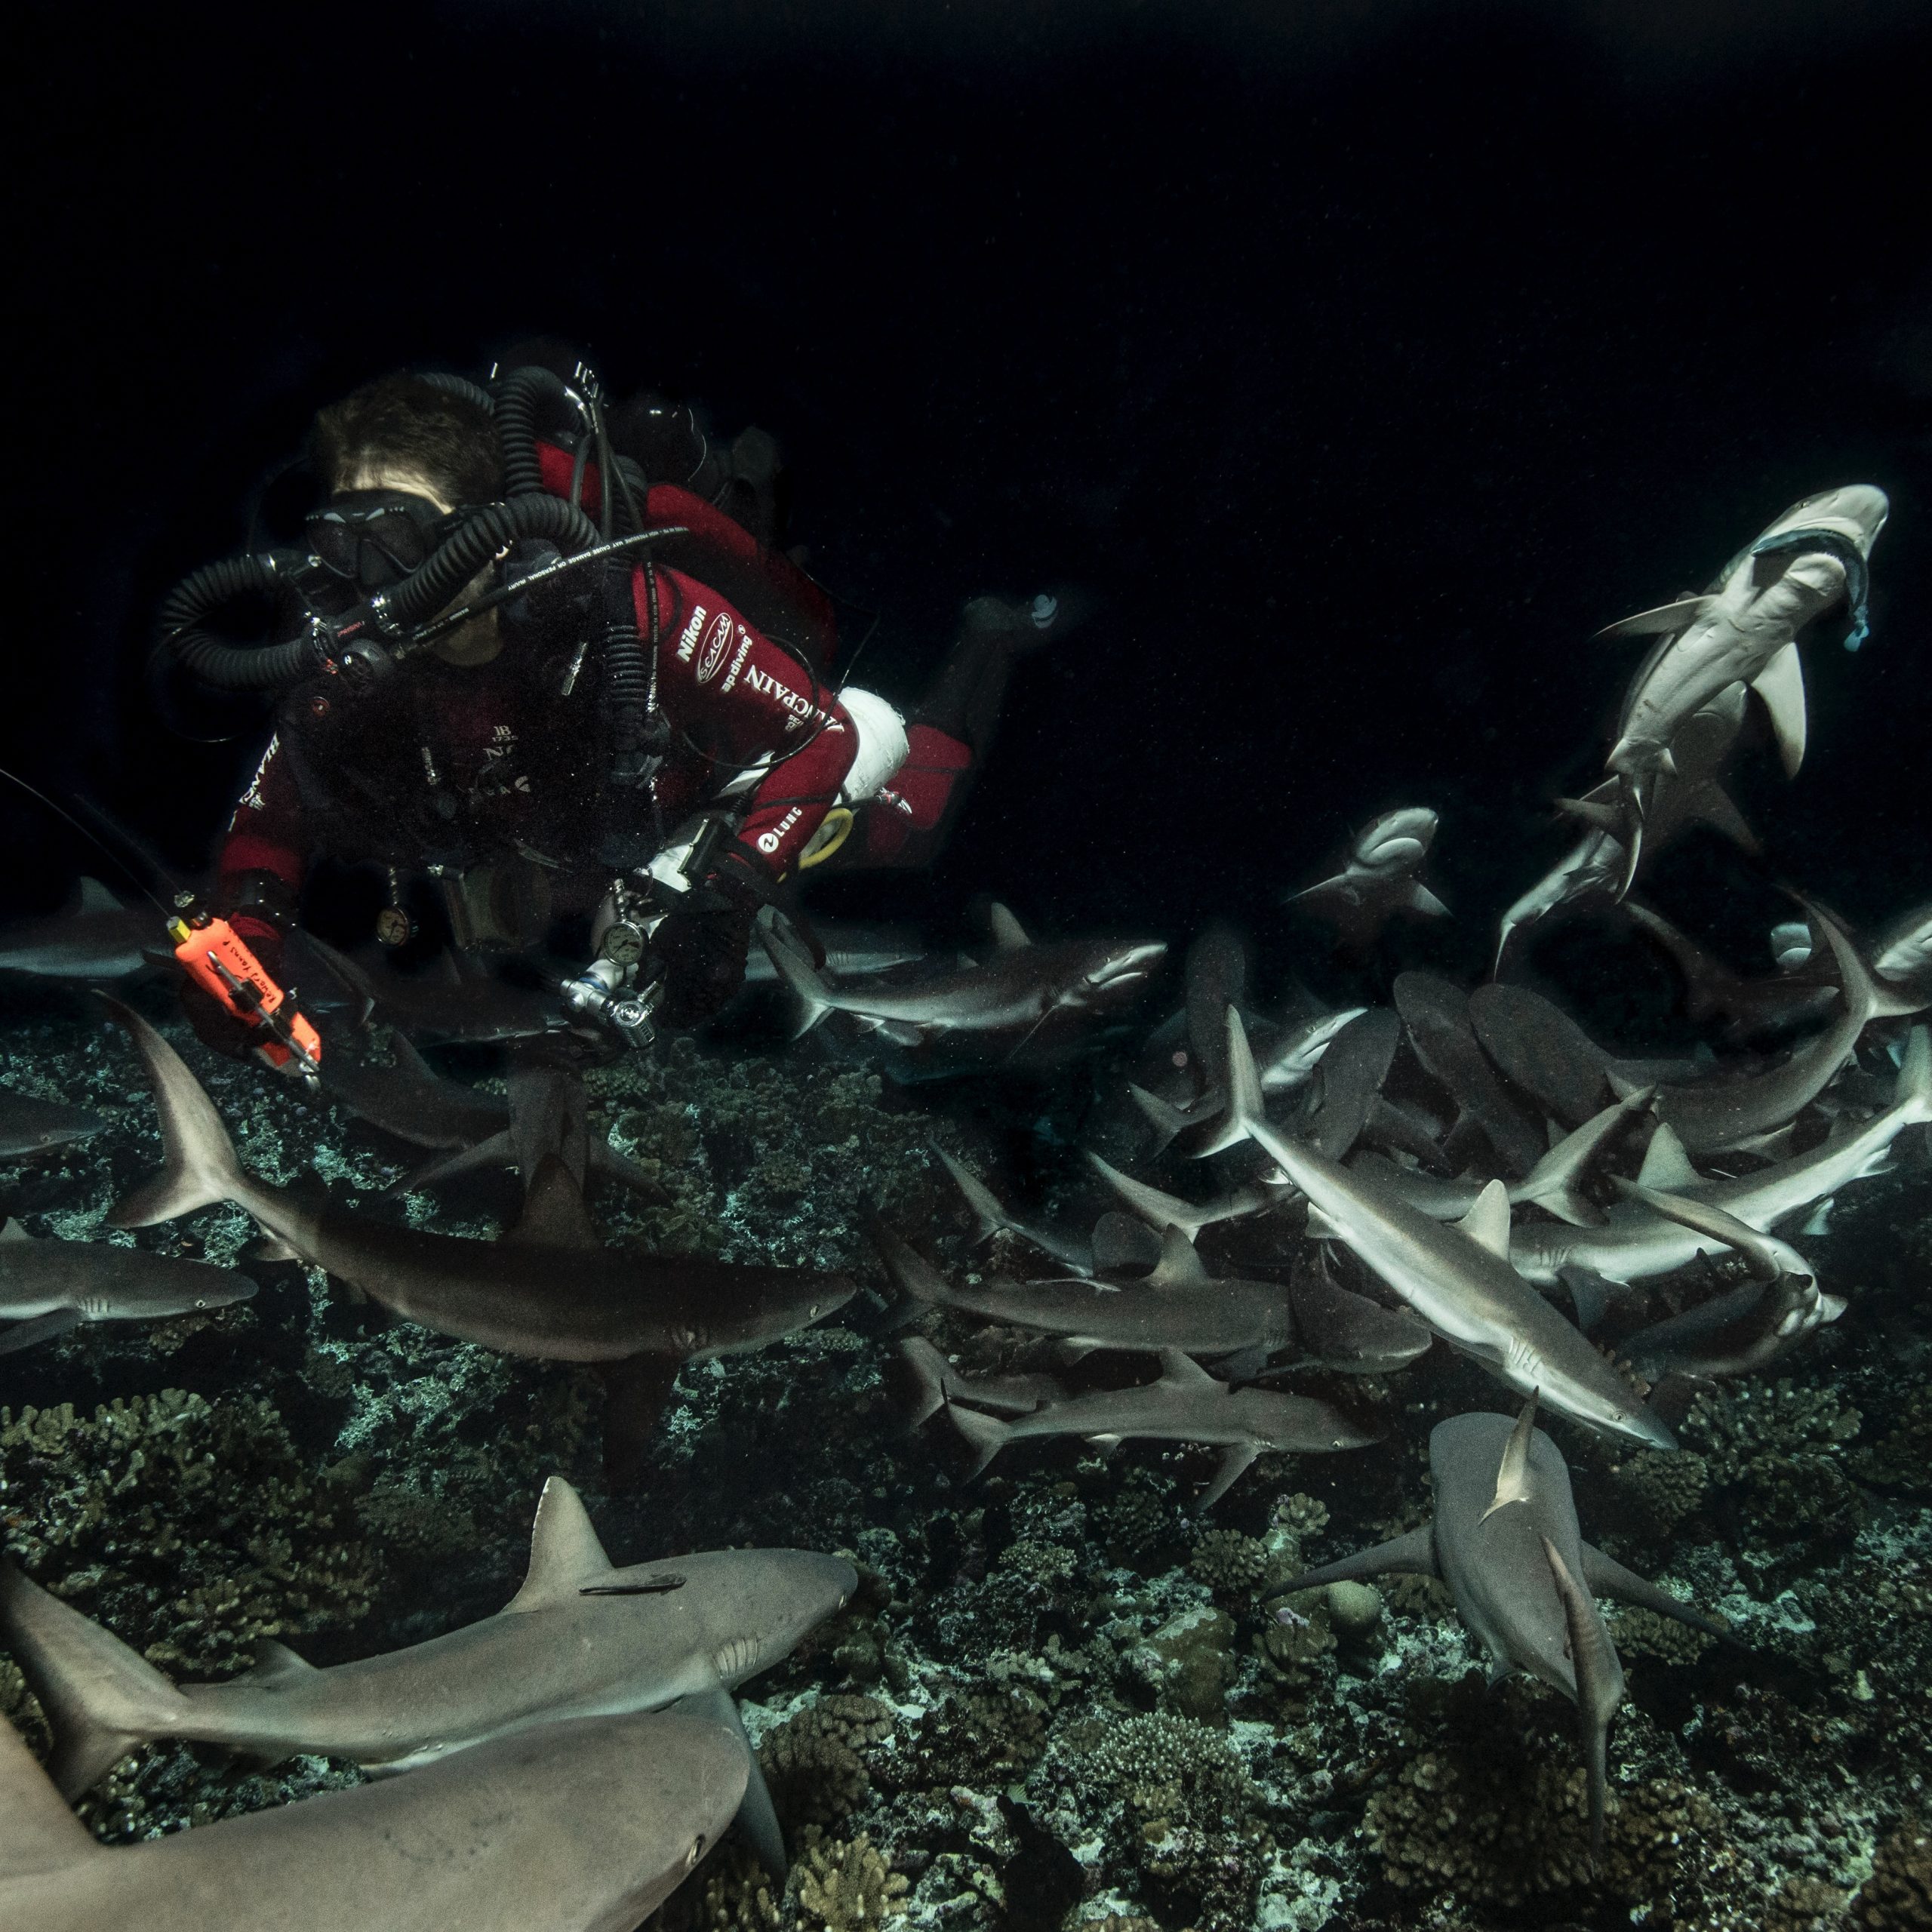 There is nothing better than diving with sharks! PC: Laurent Ballesta